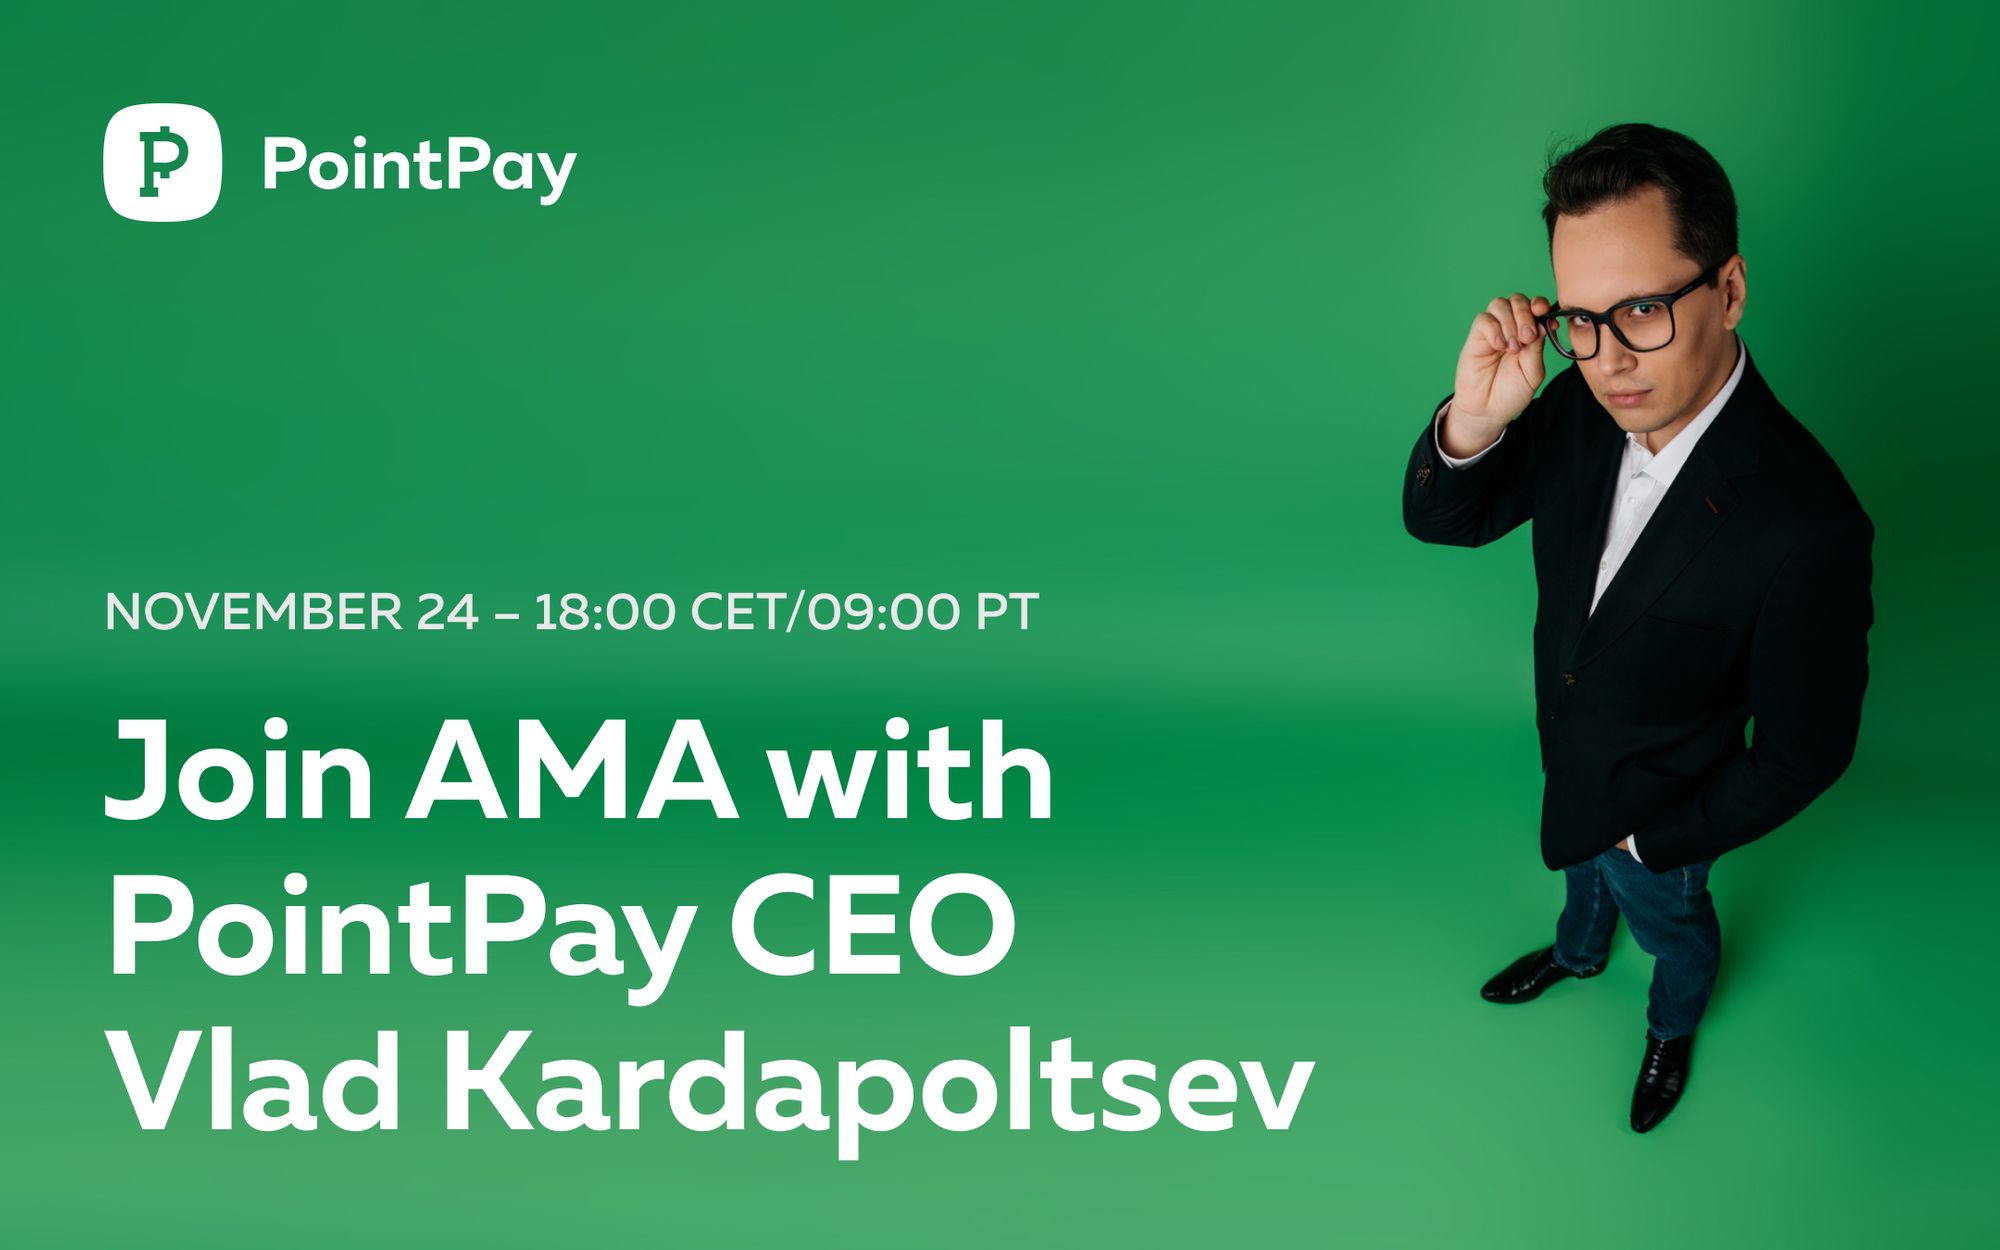 Join AMA with PointPay CEO Vladimir Kardapoltsev on the 24th of November 2022 (18:00 CET time)